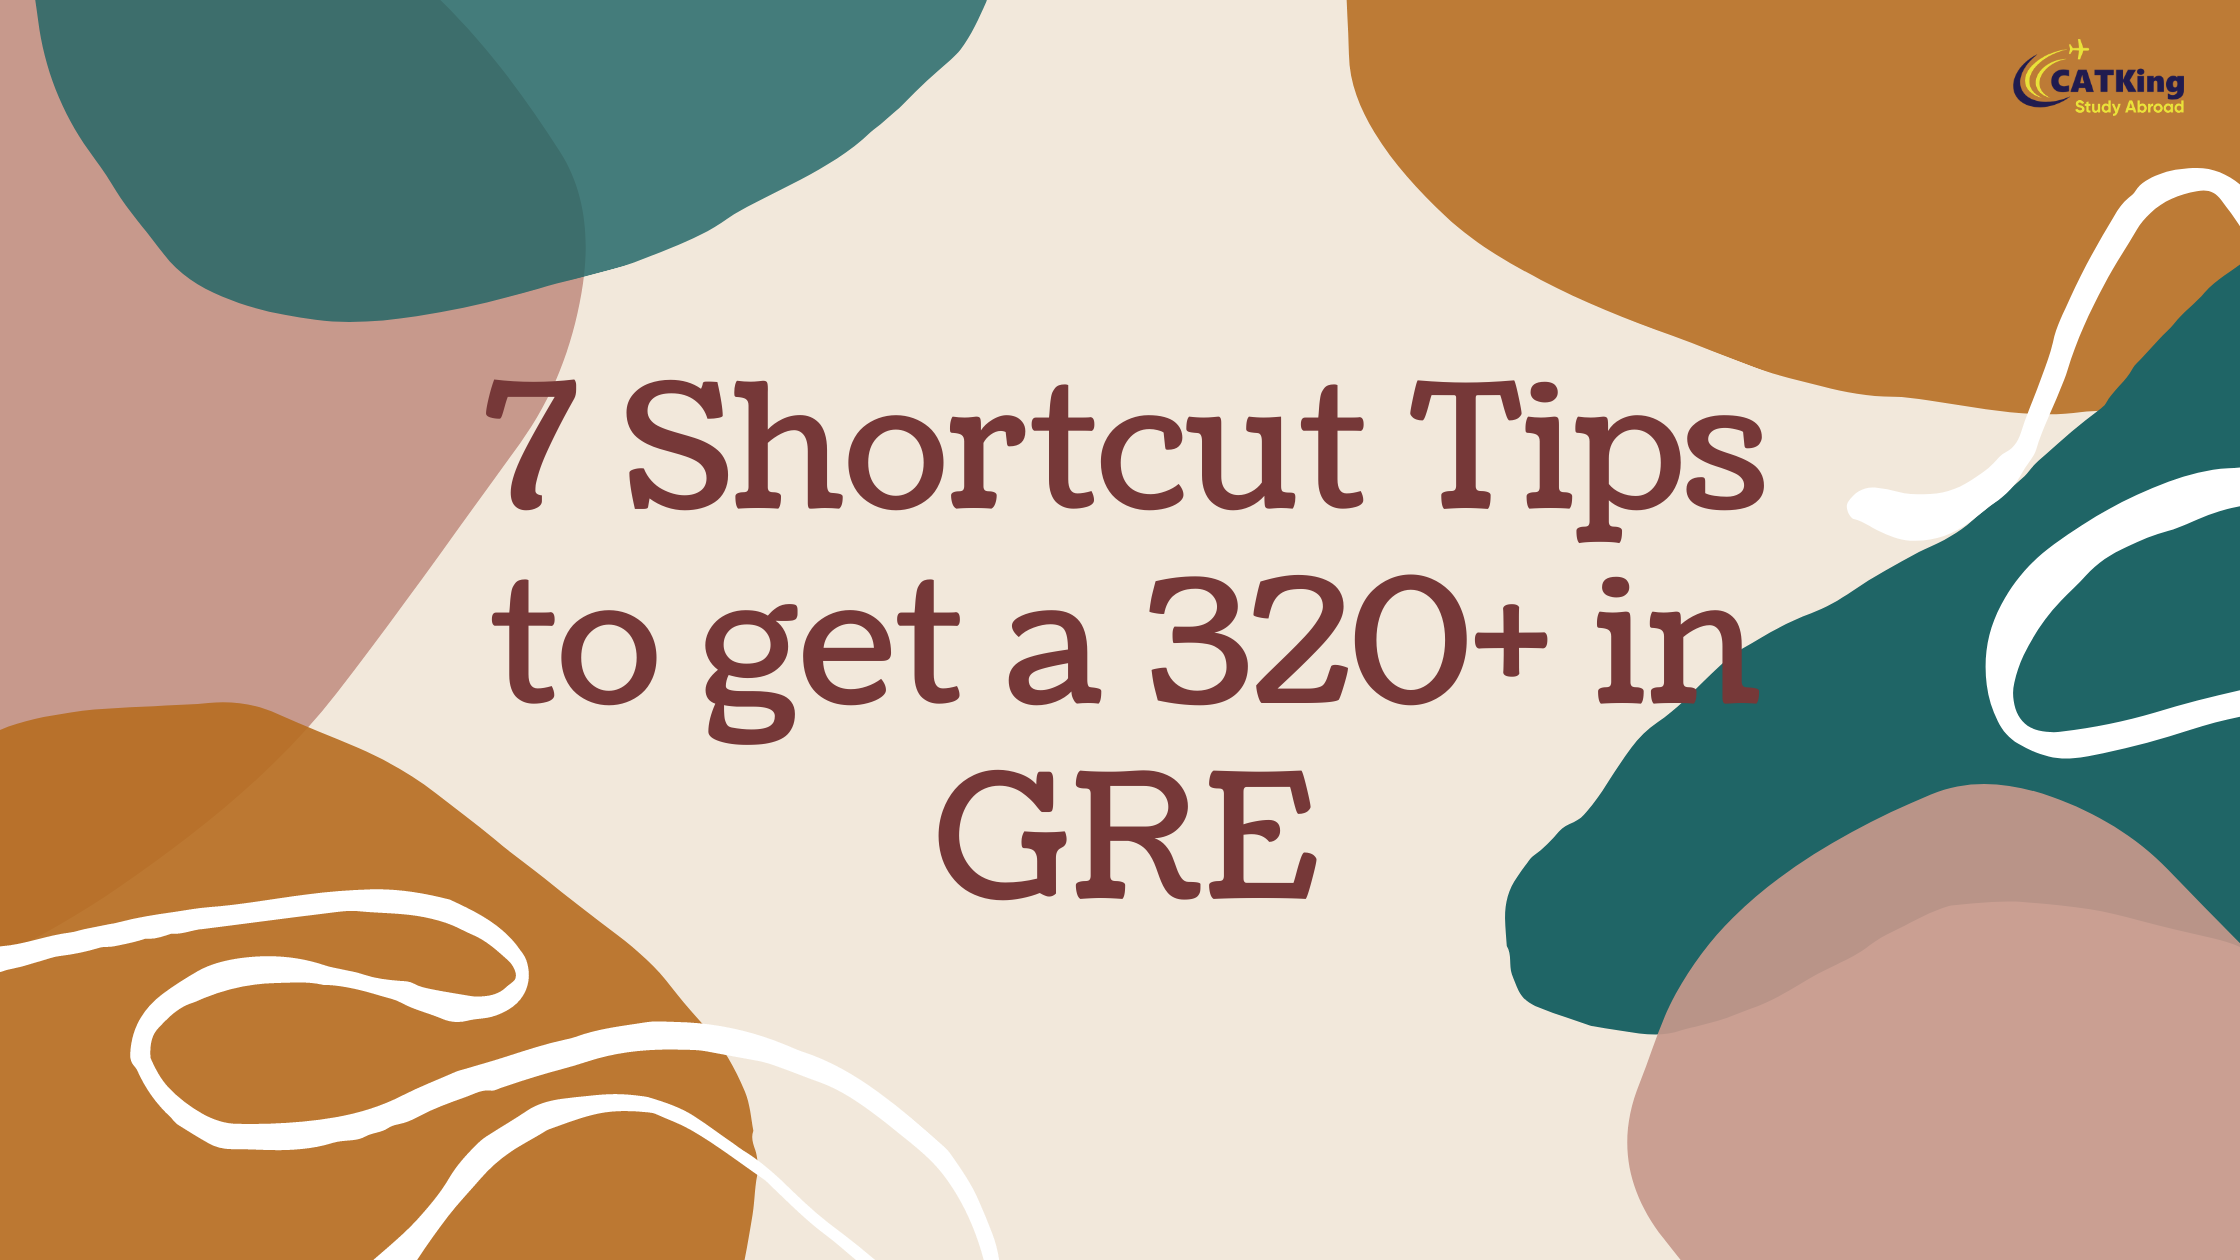 7 Shortcut Tips to get a 320+ in GRE